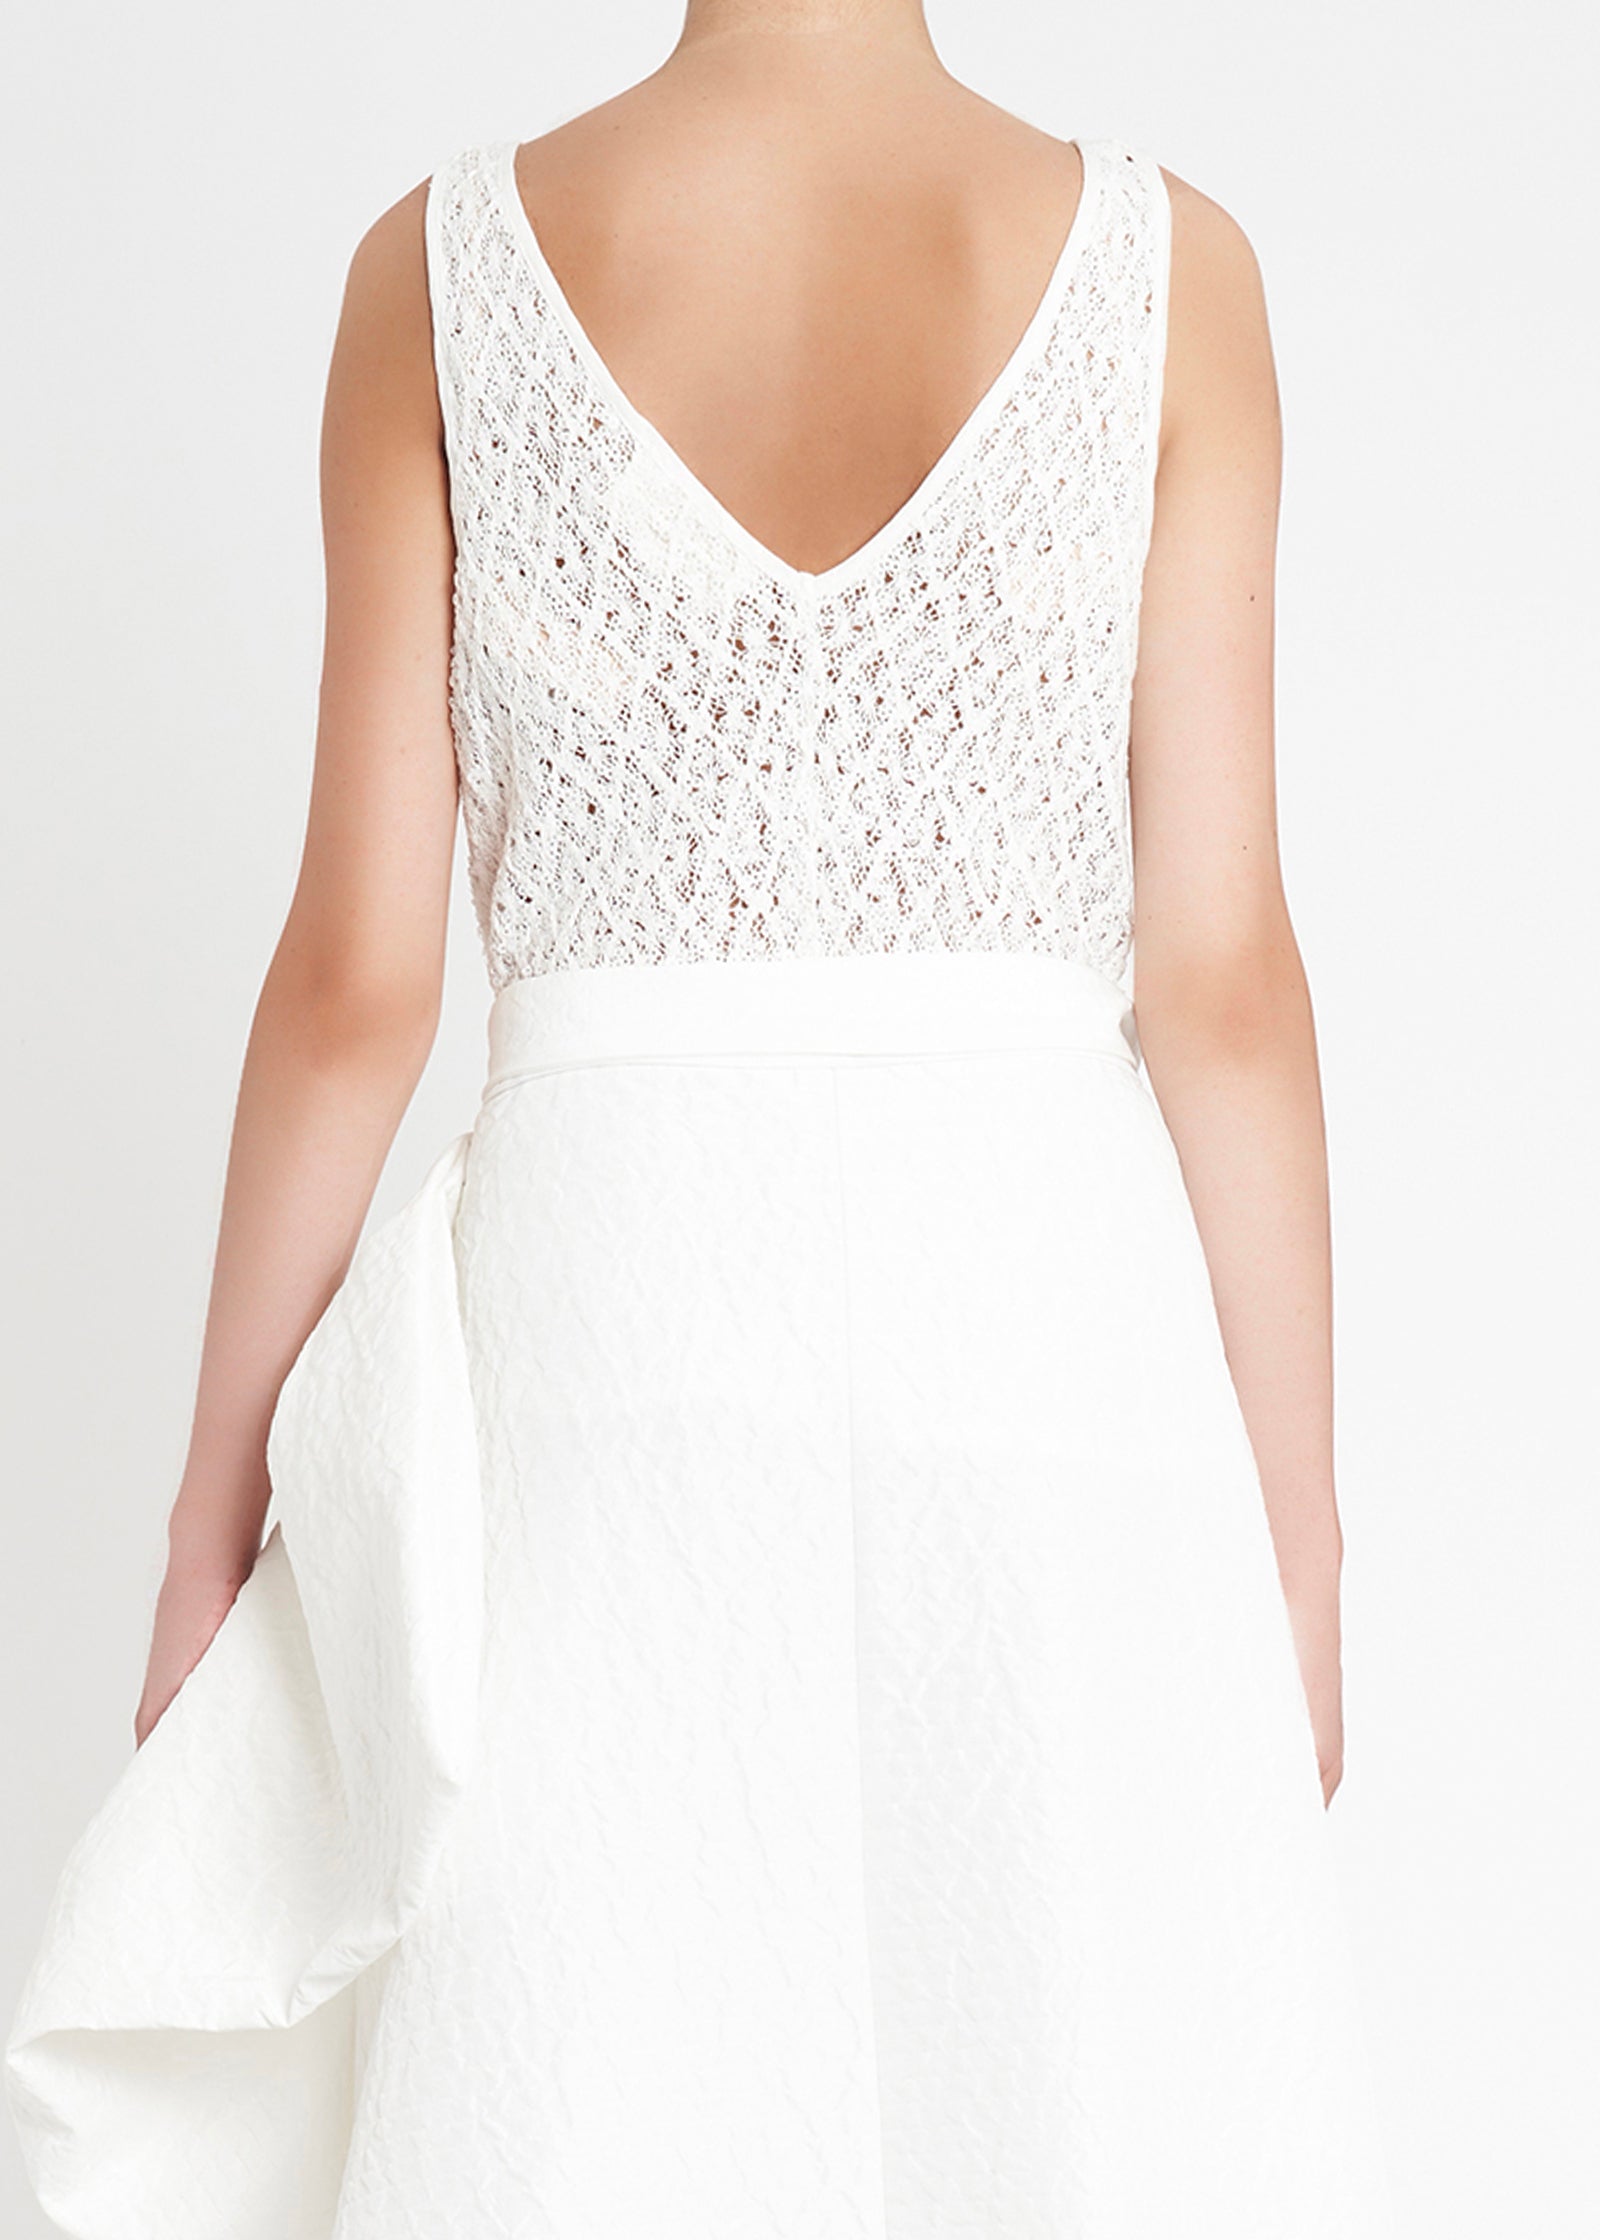 Lighthouse Cami | White Sequin